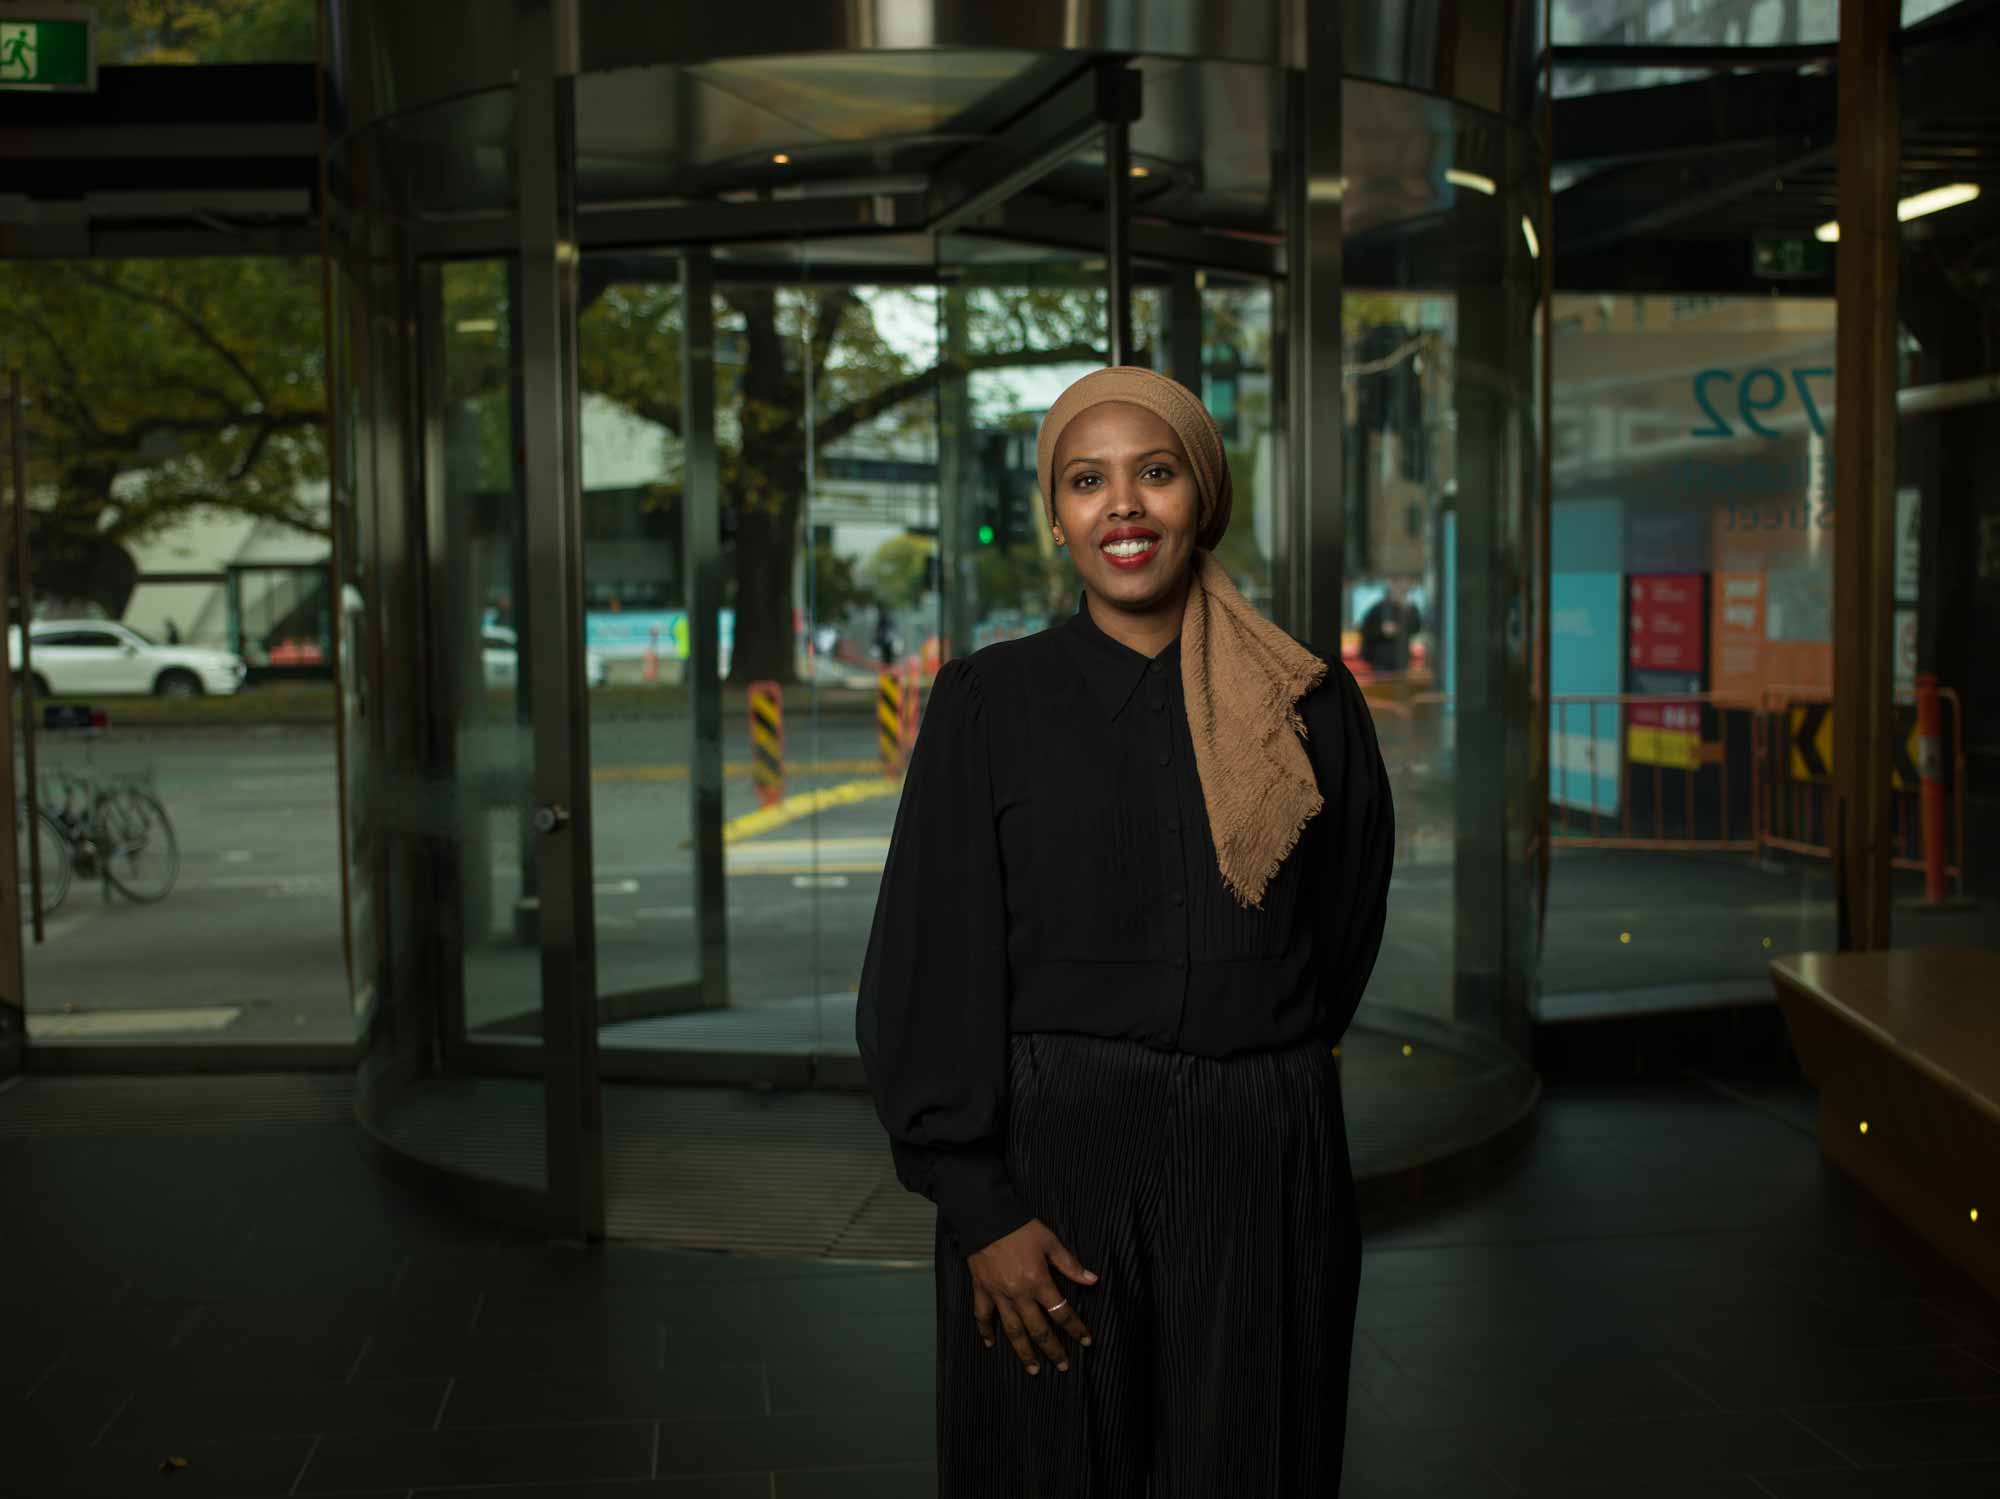 Nafisa Yussf stands in the Doherty Institute foyer